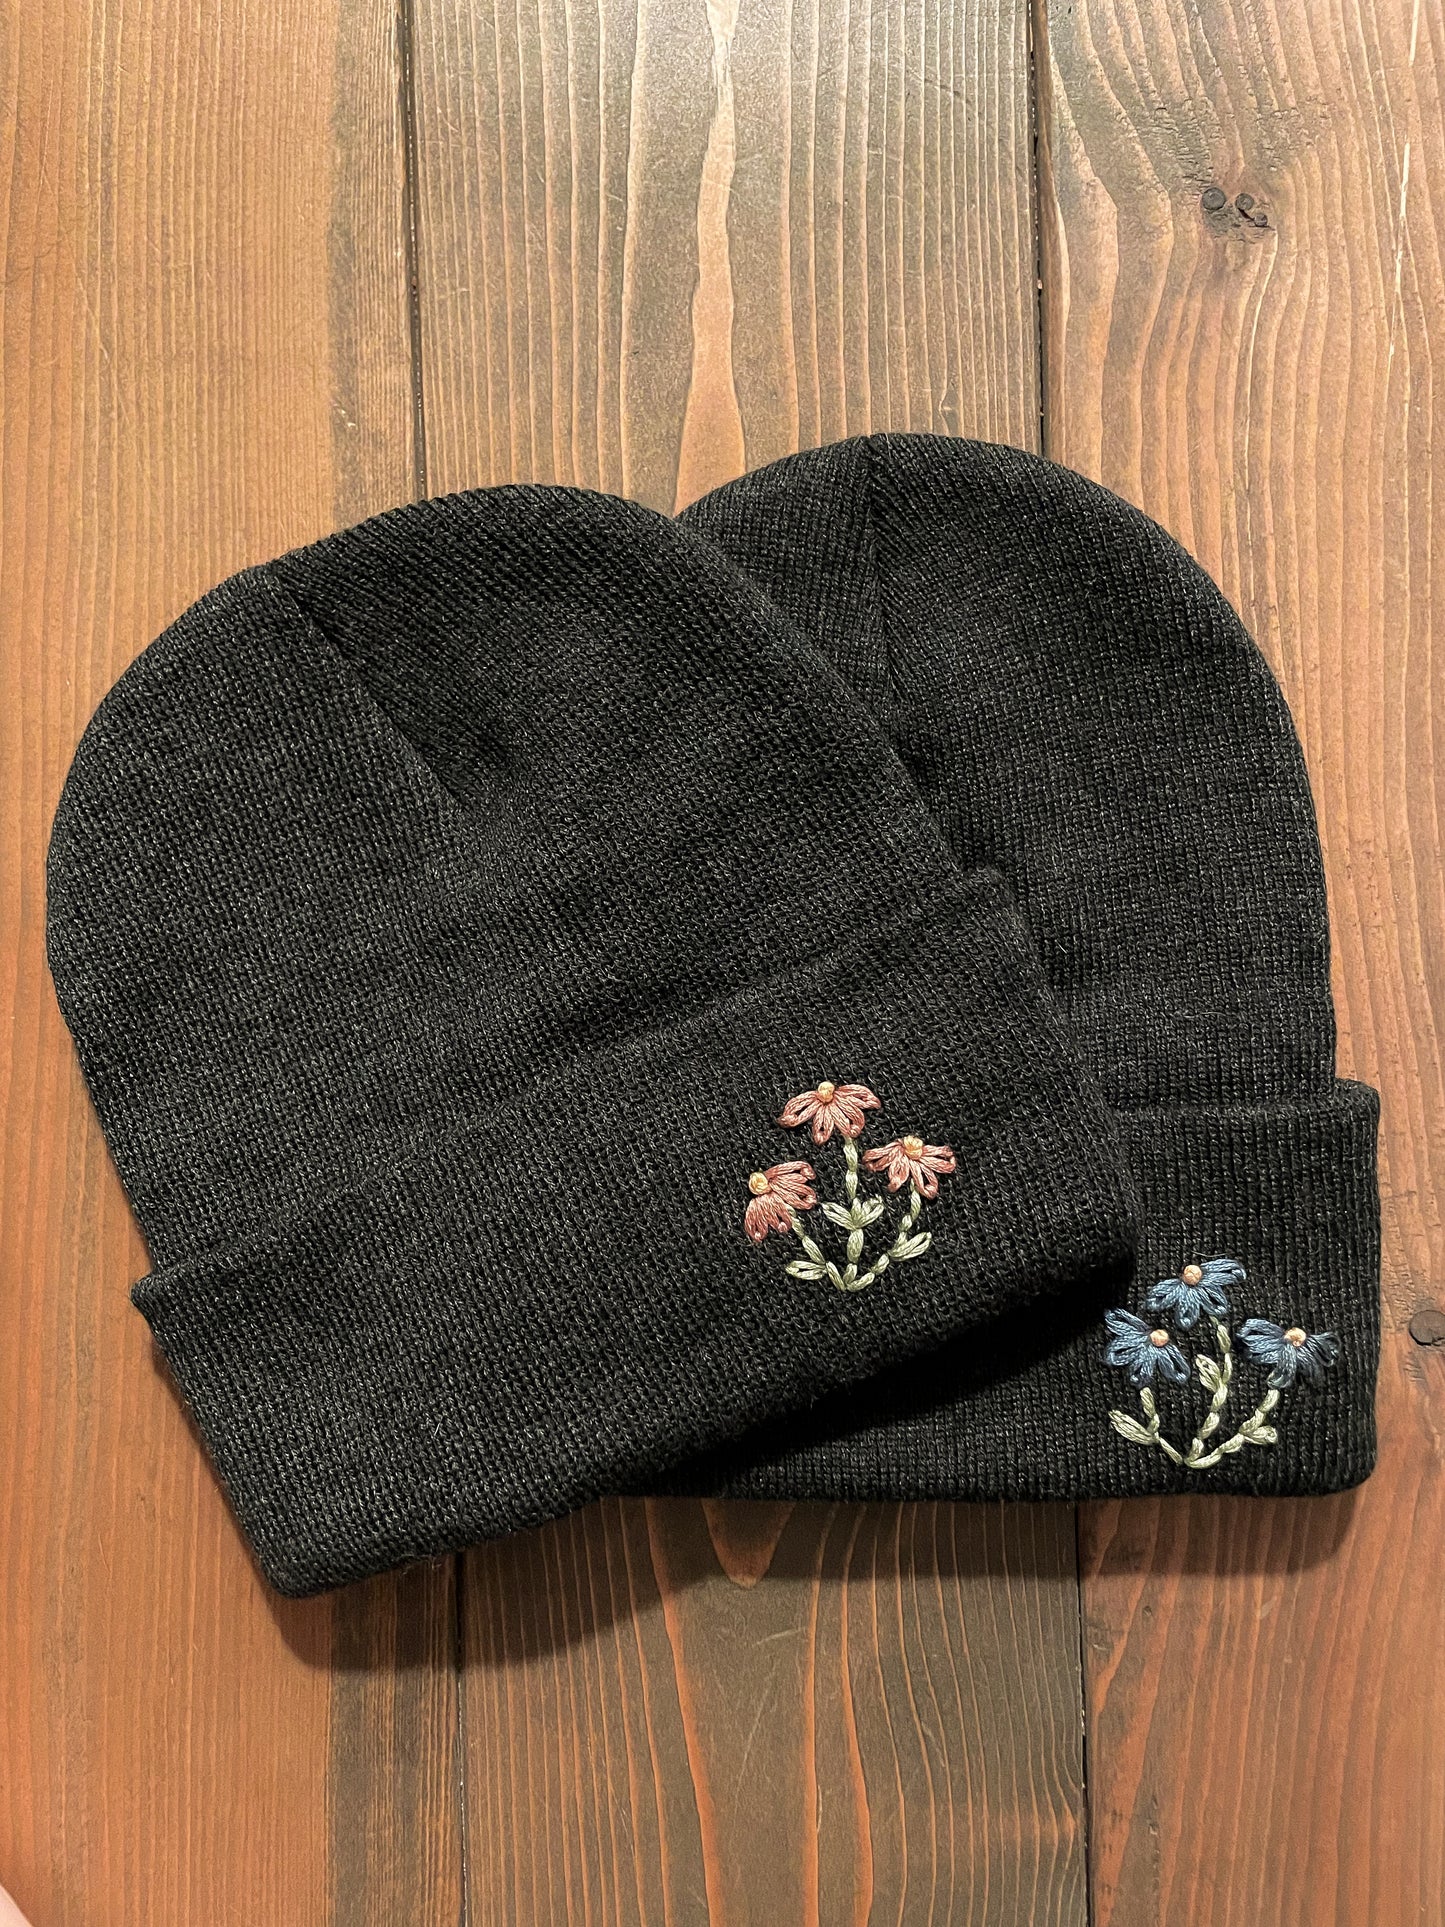 Hand Embroidered Beanie (Charcoal)